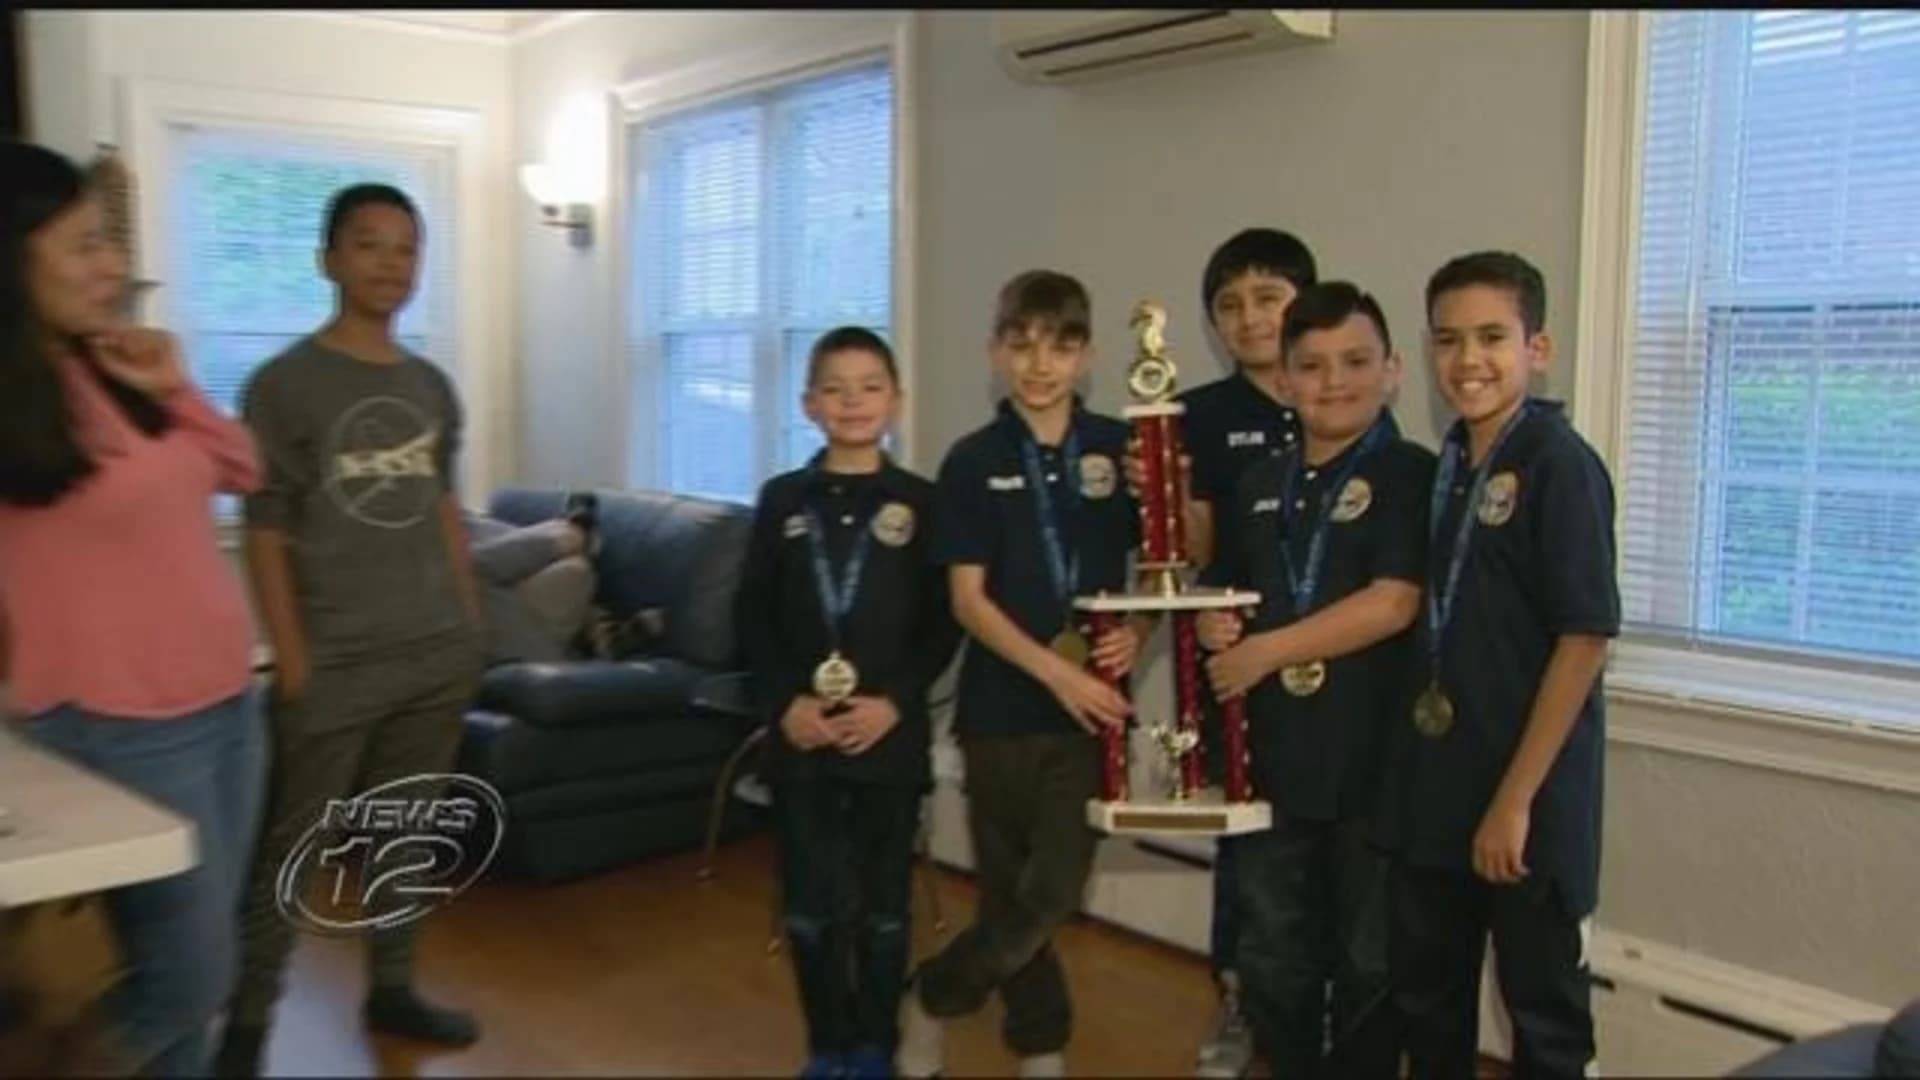 New Rochelle students bring home chess title